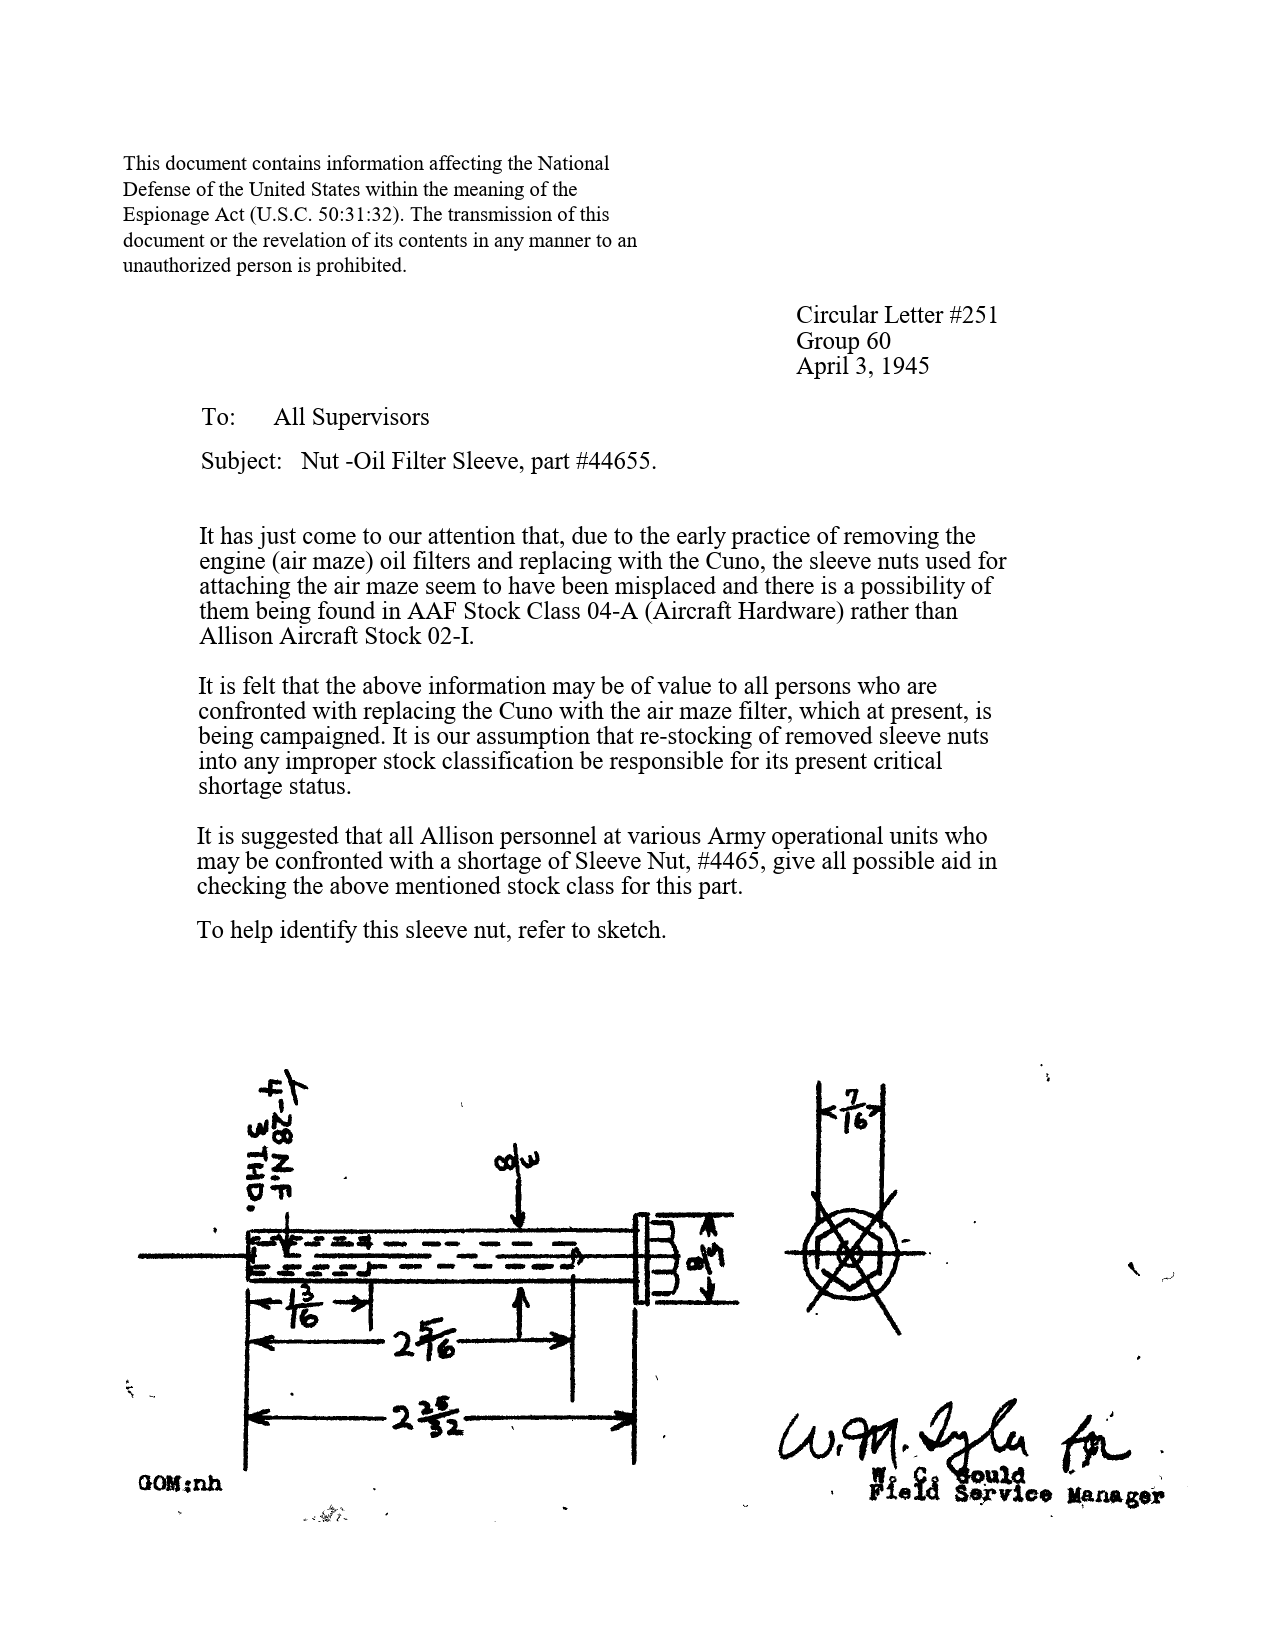 Sample page 1 from AirCorps Library document: Nut - Oil Filter Sleeve, Part #44655